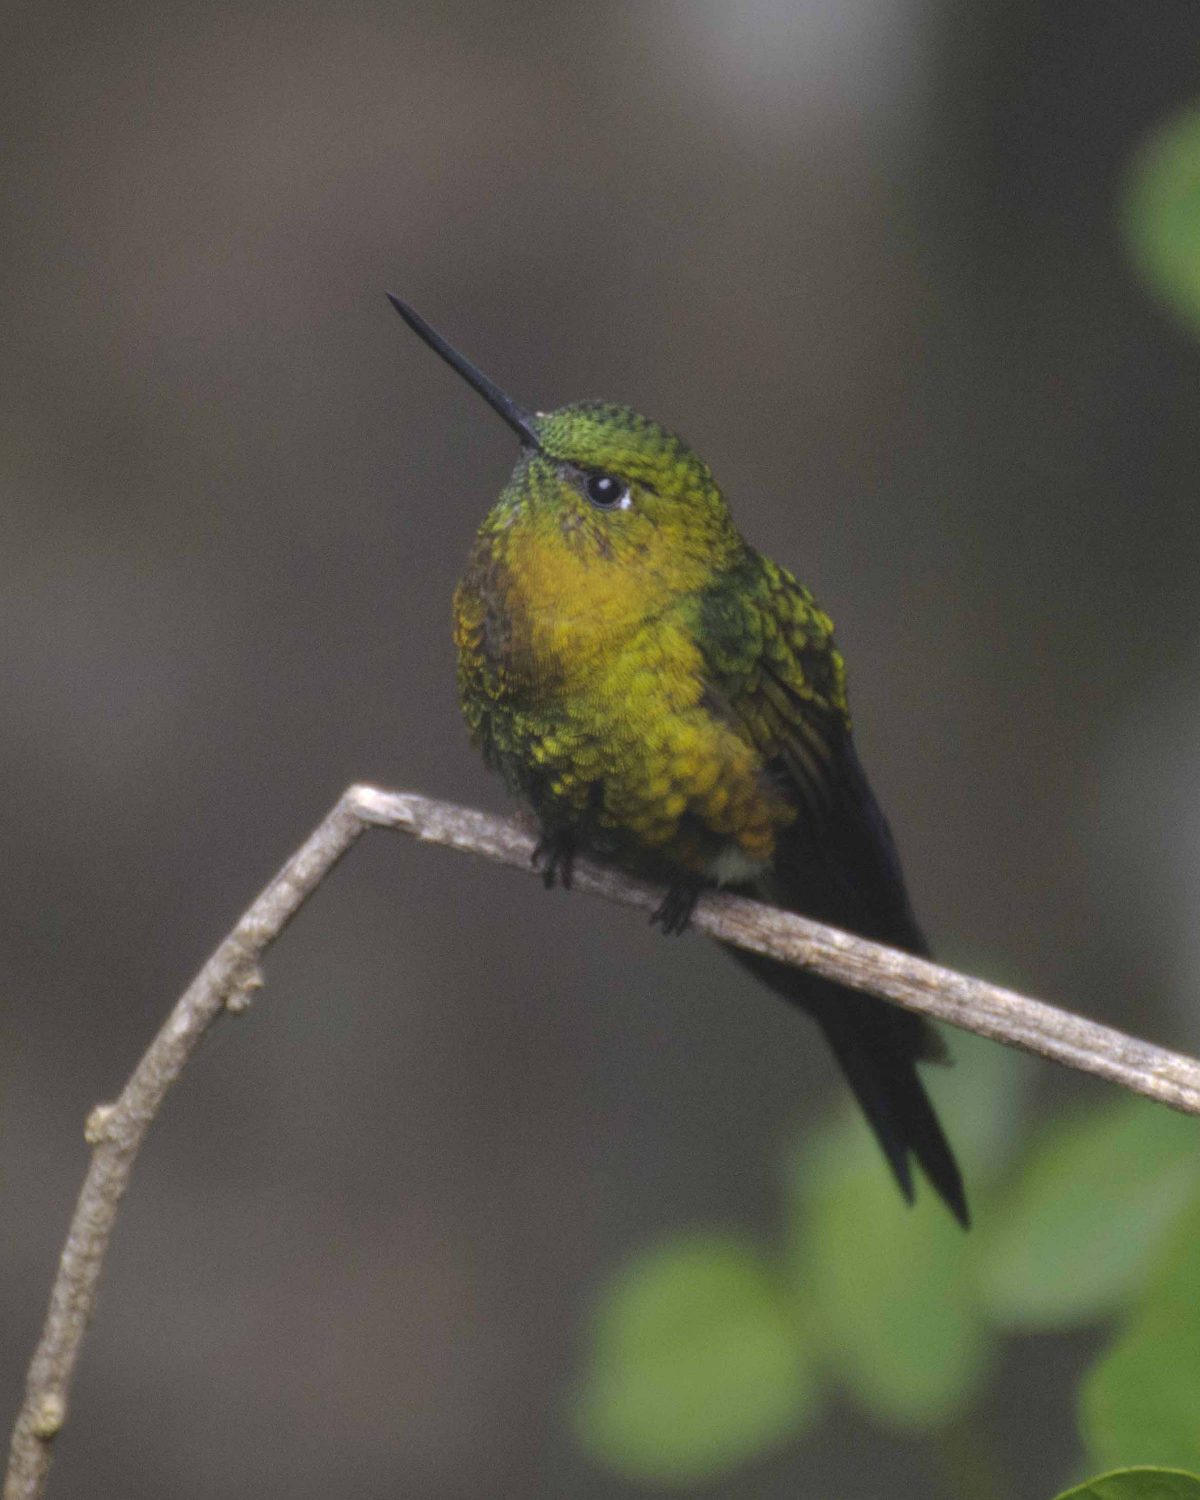 The Golden-breasted Puffleg can look very small when perched | ©Angela Drake